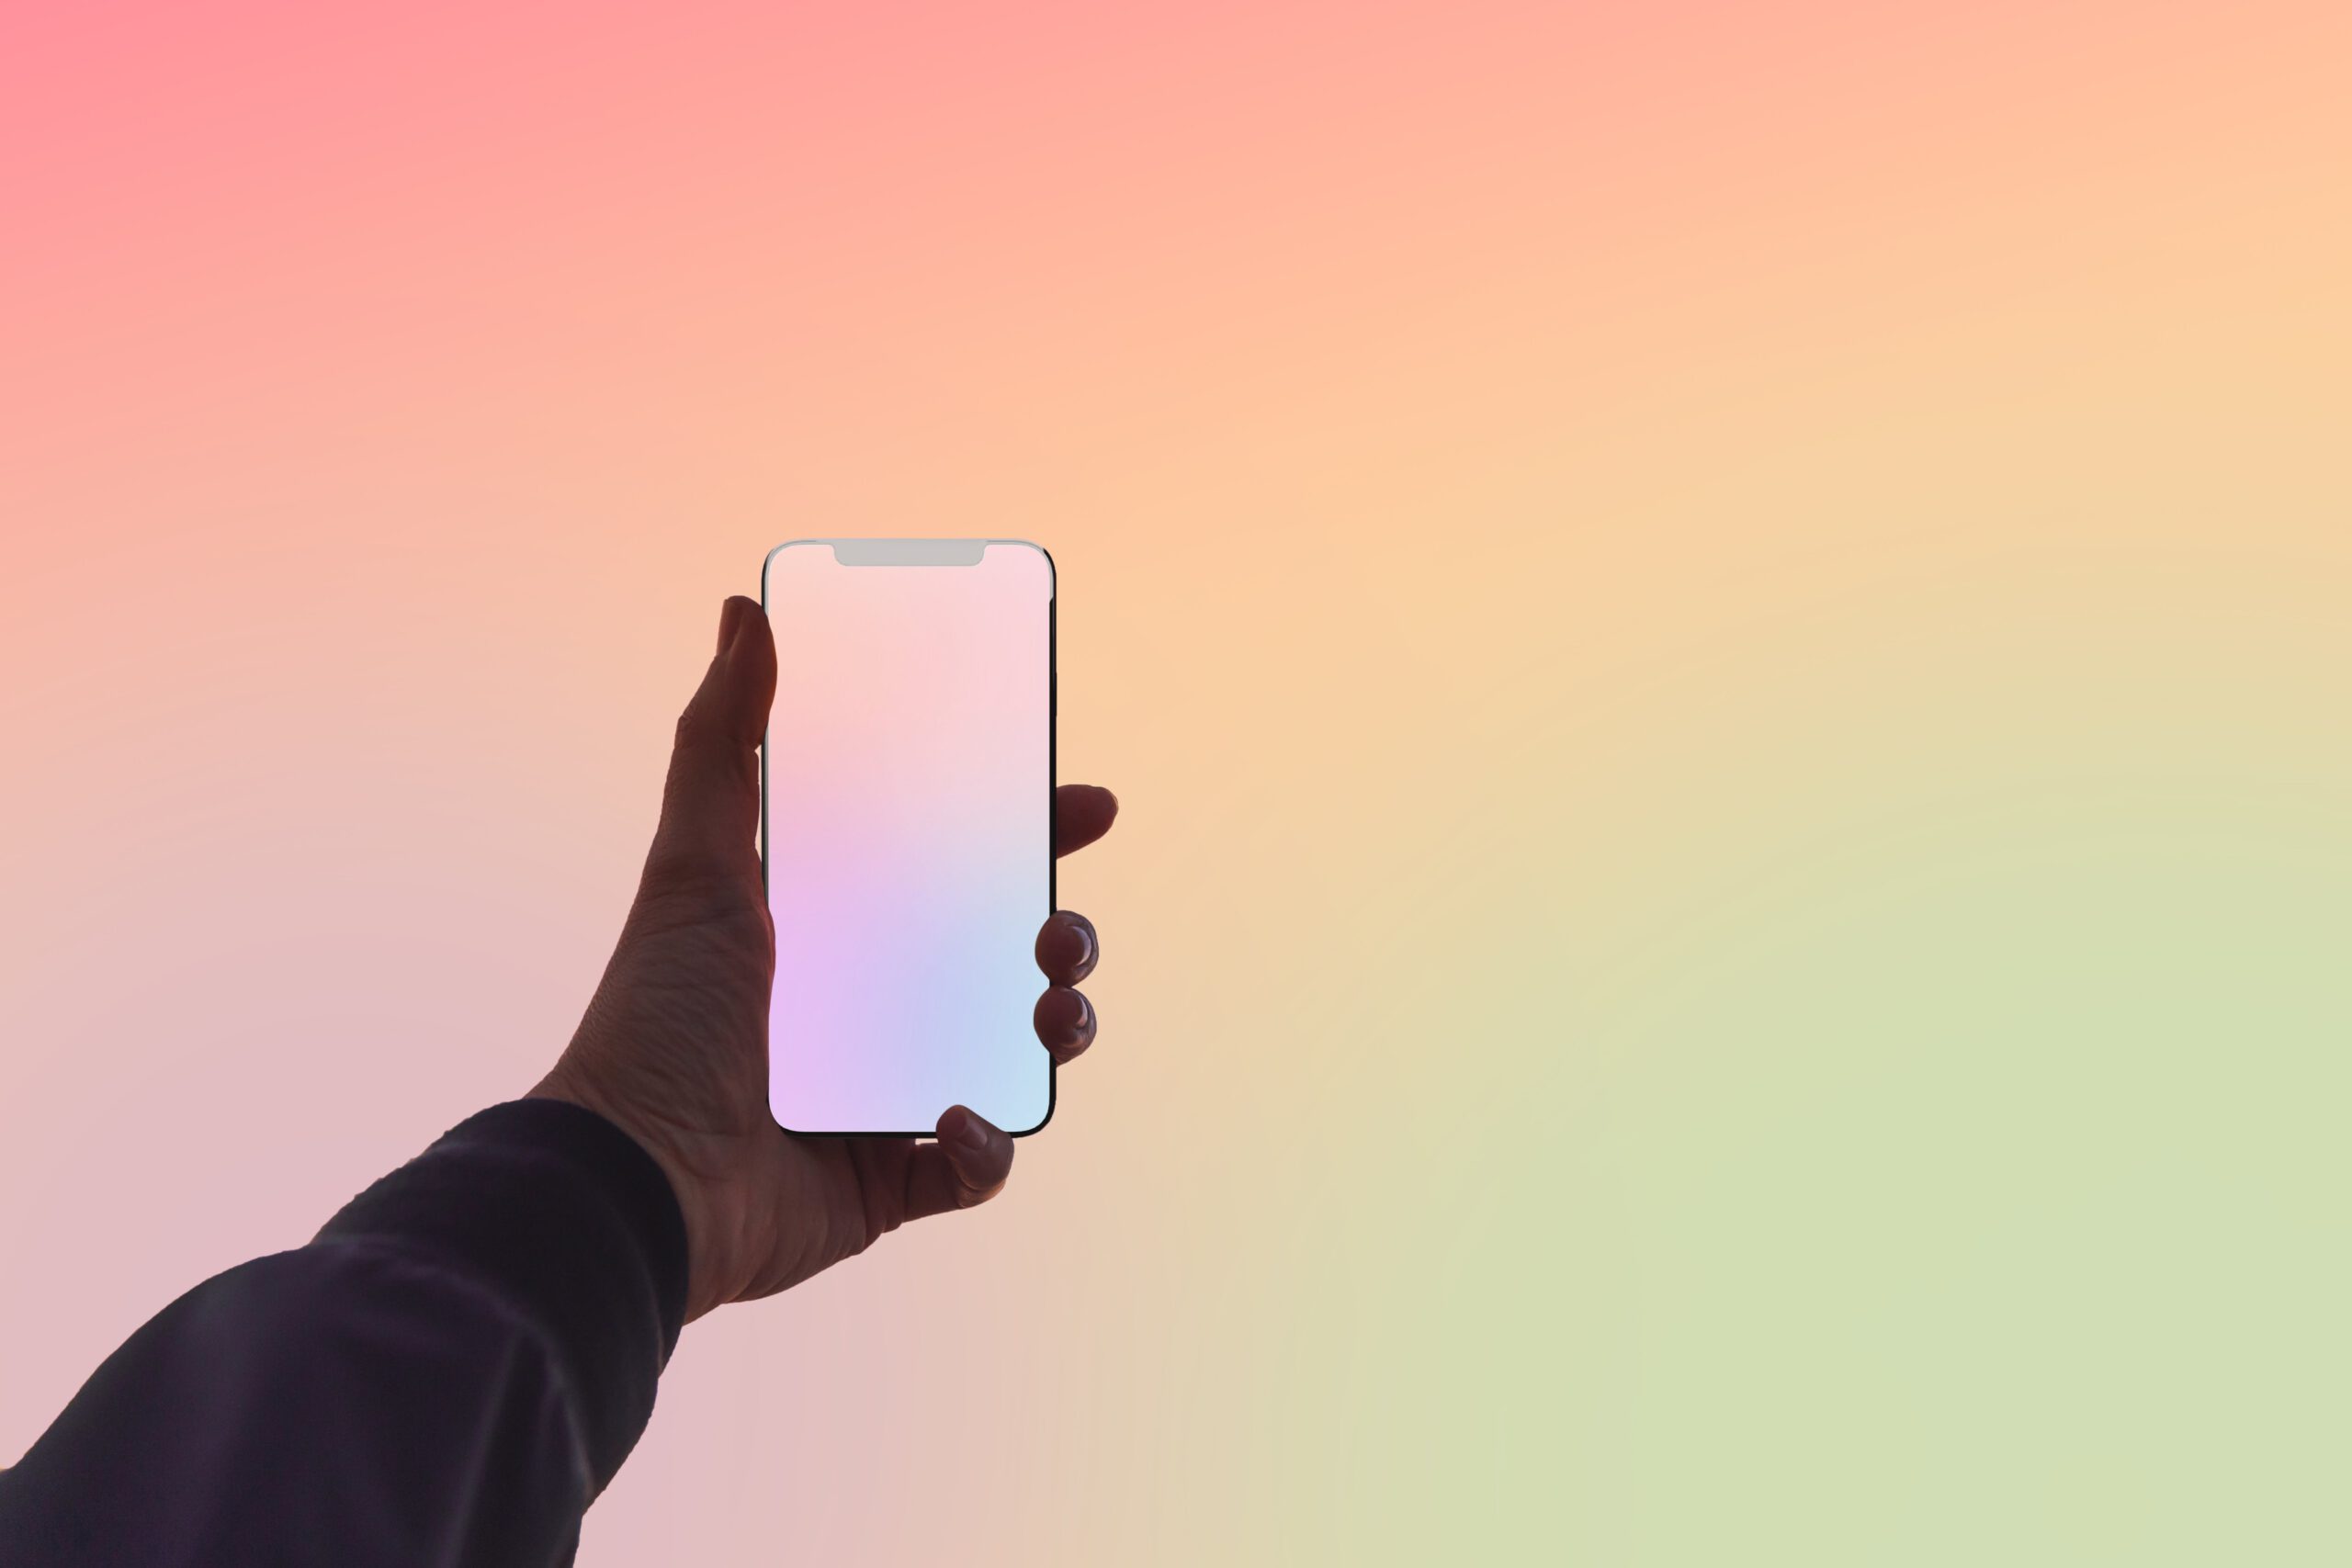 A hand holding out an iPhone in front a pink, yellow, and green gradient background.